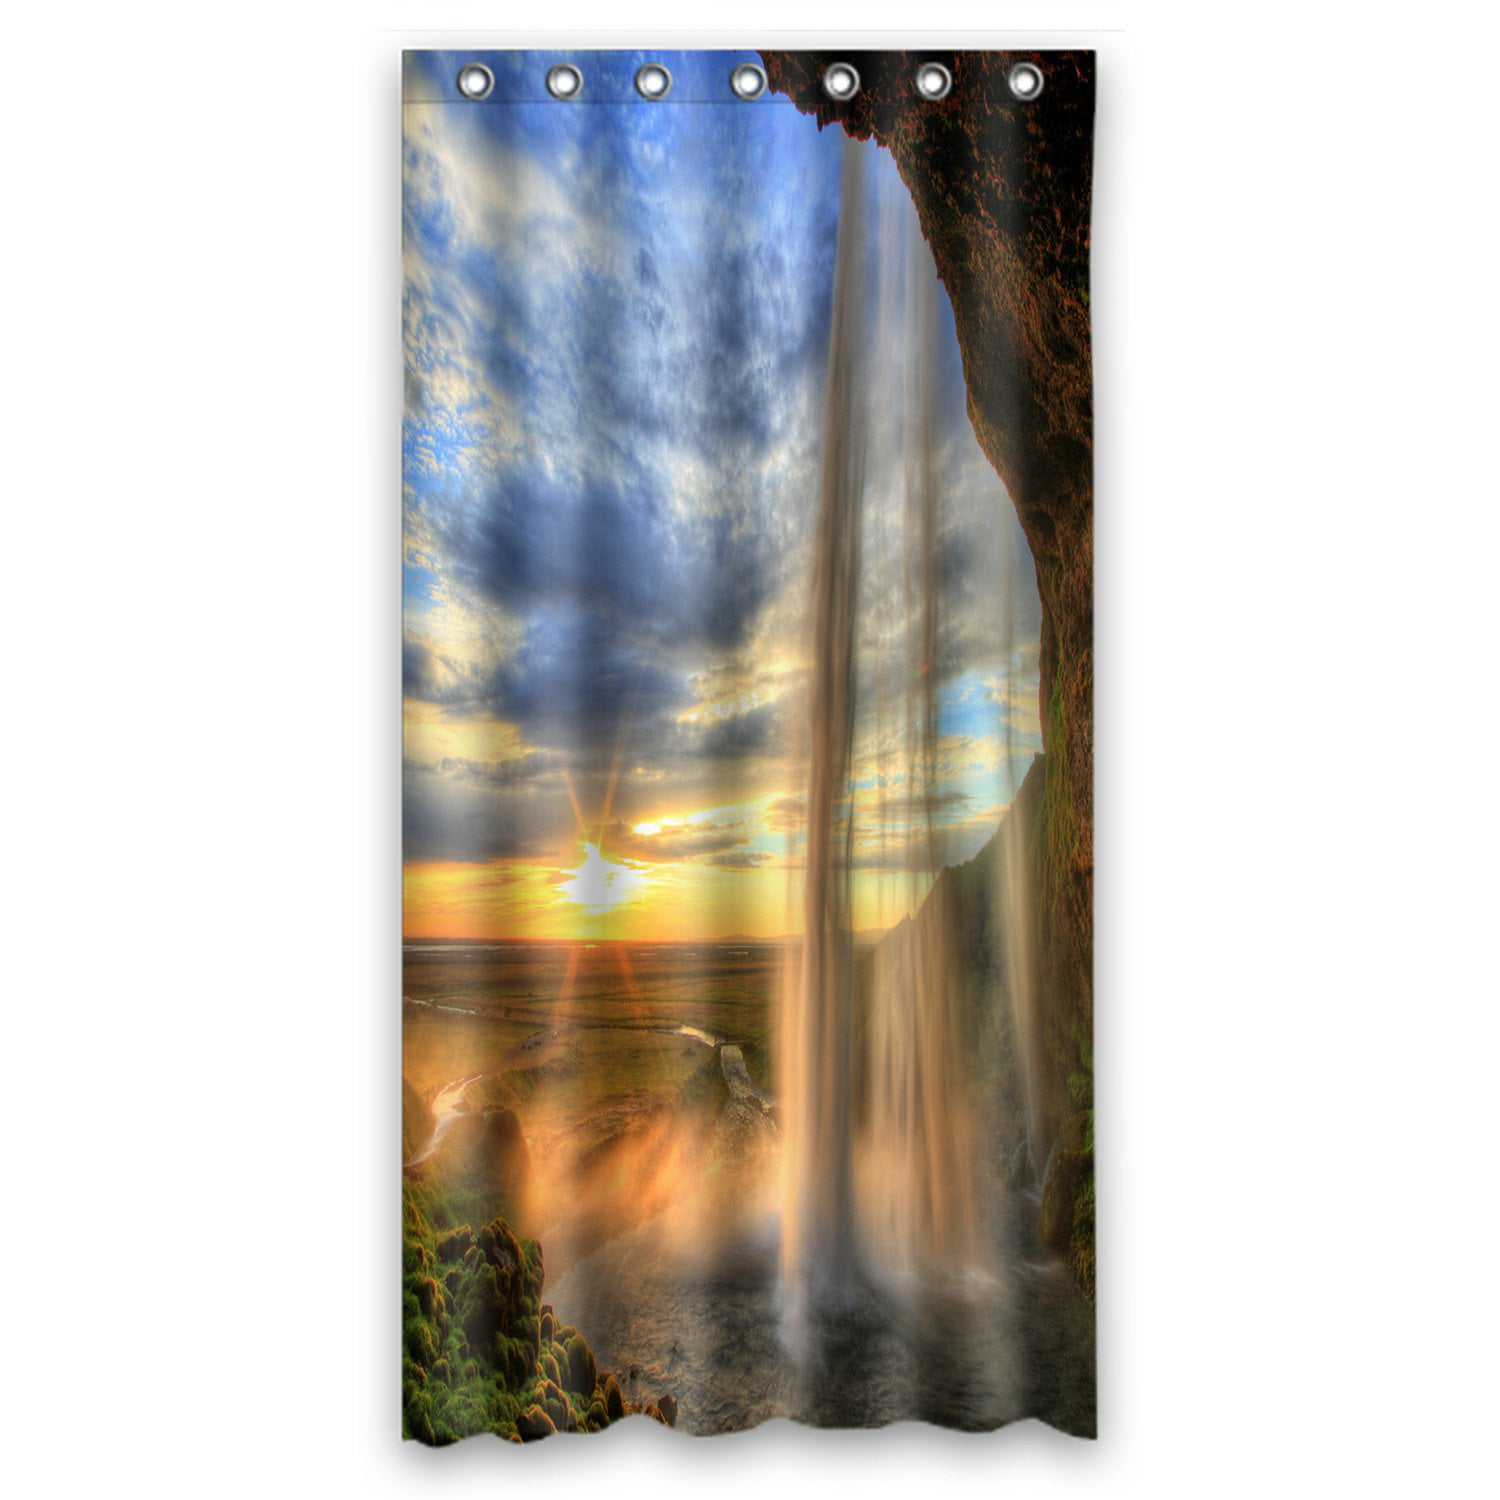 72x72'' Bathroom Waterproof Shower Curtain Waterfall At Sunset In Iceland Scenic 